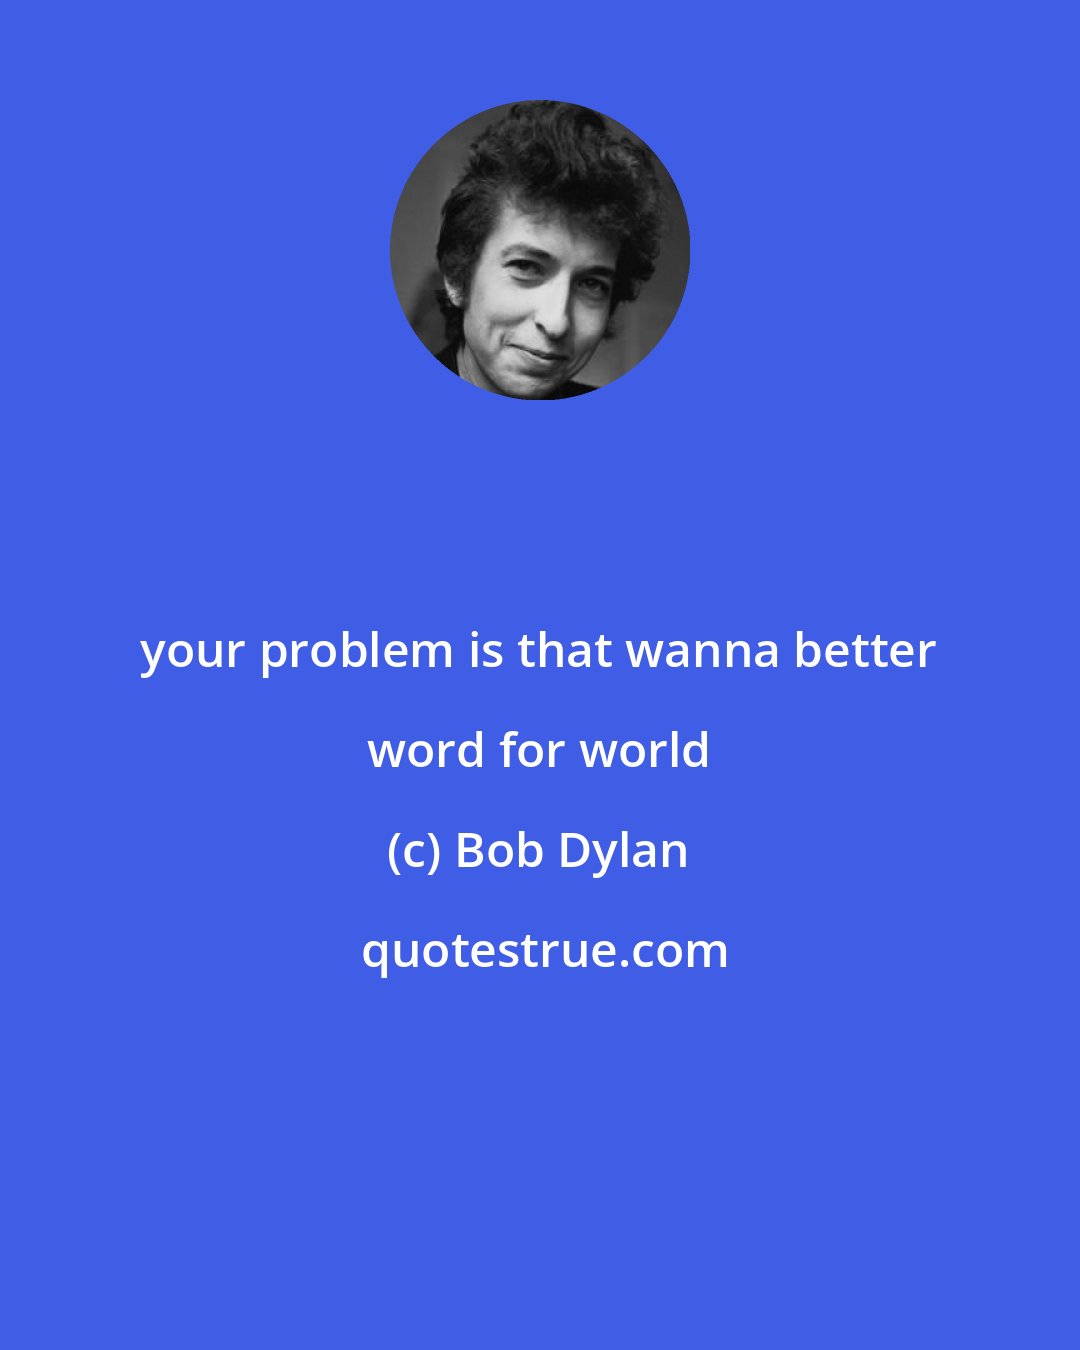 Bob Dylan: your problem is that wanna better word for world